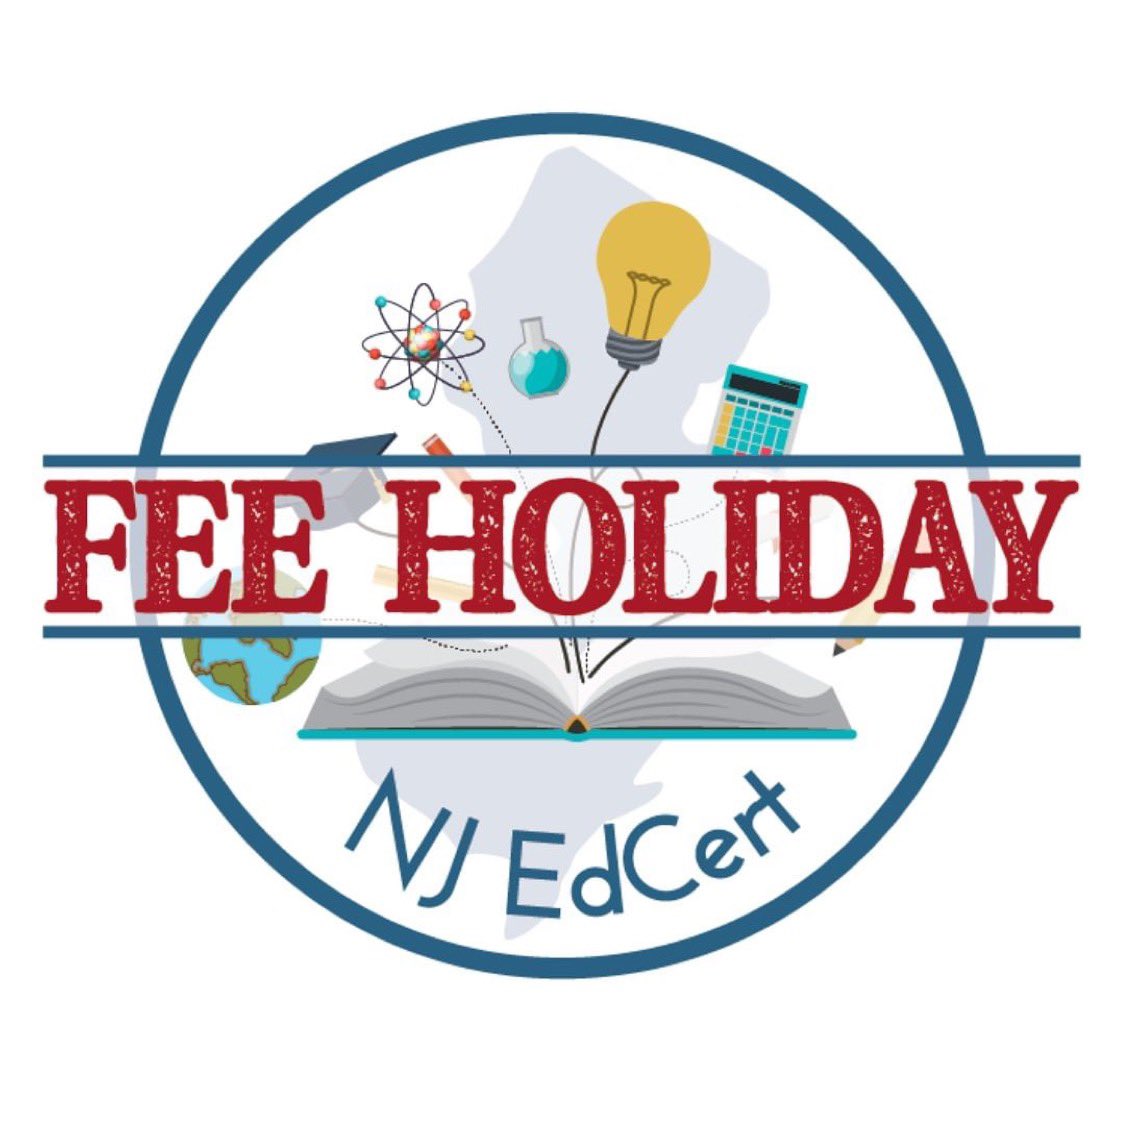 Repost from @newjerseydoe
•
Exciting news: @govmurphy and @newjerseydoe have announced a Certification Fee Holiday! Prospective and current educators can now take advantage of a temporary waiver of certification fees. Learn more: tinyurl.com/yww9eu2p #FeeHoliday